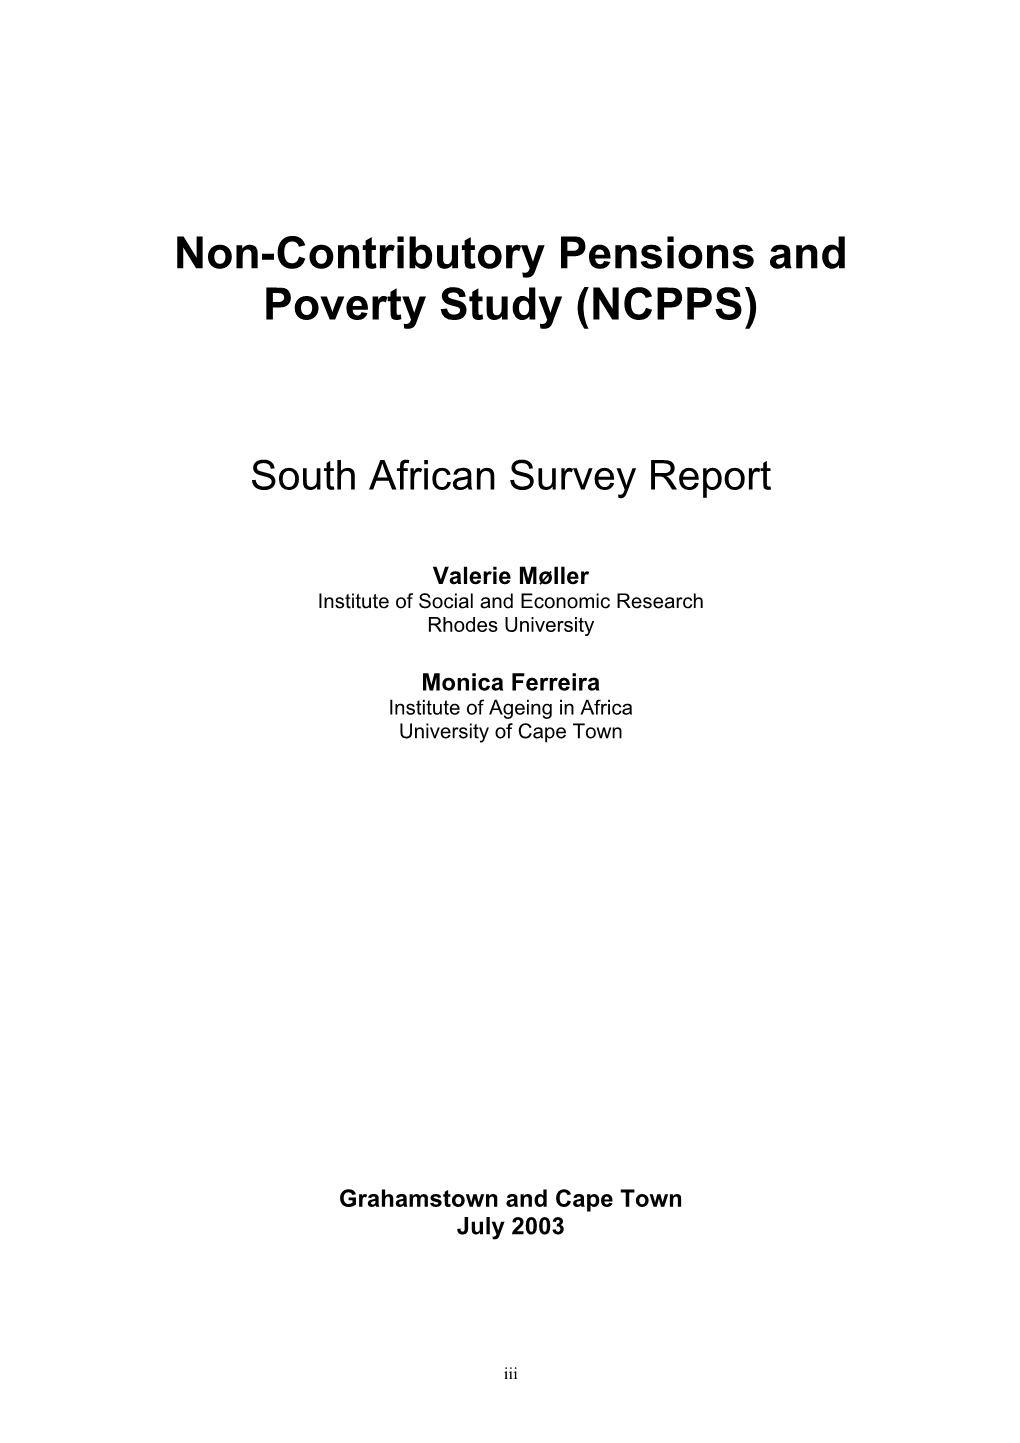 Non-Contributory Pensions and Poverty Study (NCPPS)